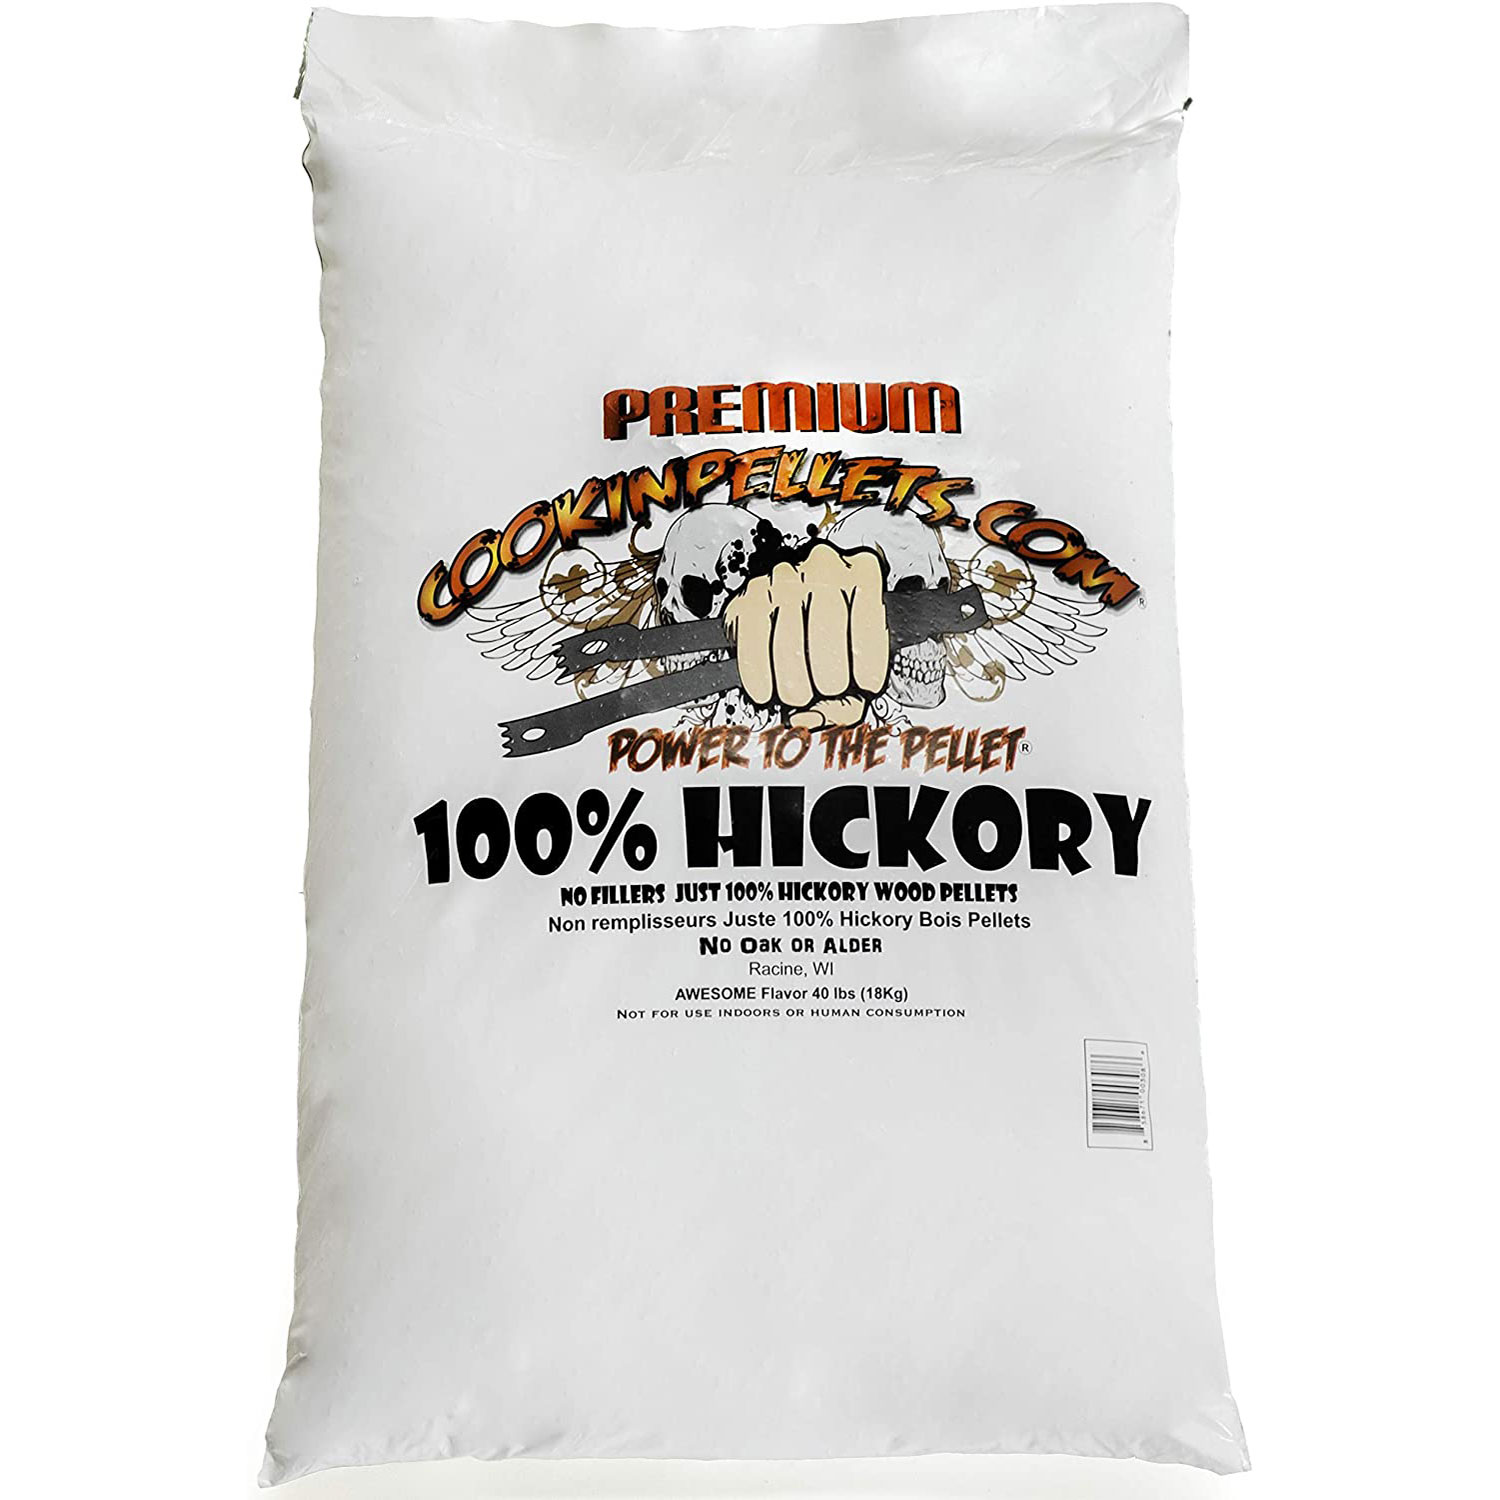 CookinPellets Premium Hickory Grill Smoker Smoking Wood Pellets, 40 Pound Bag - image 1 of 2